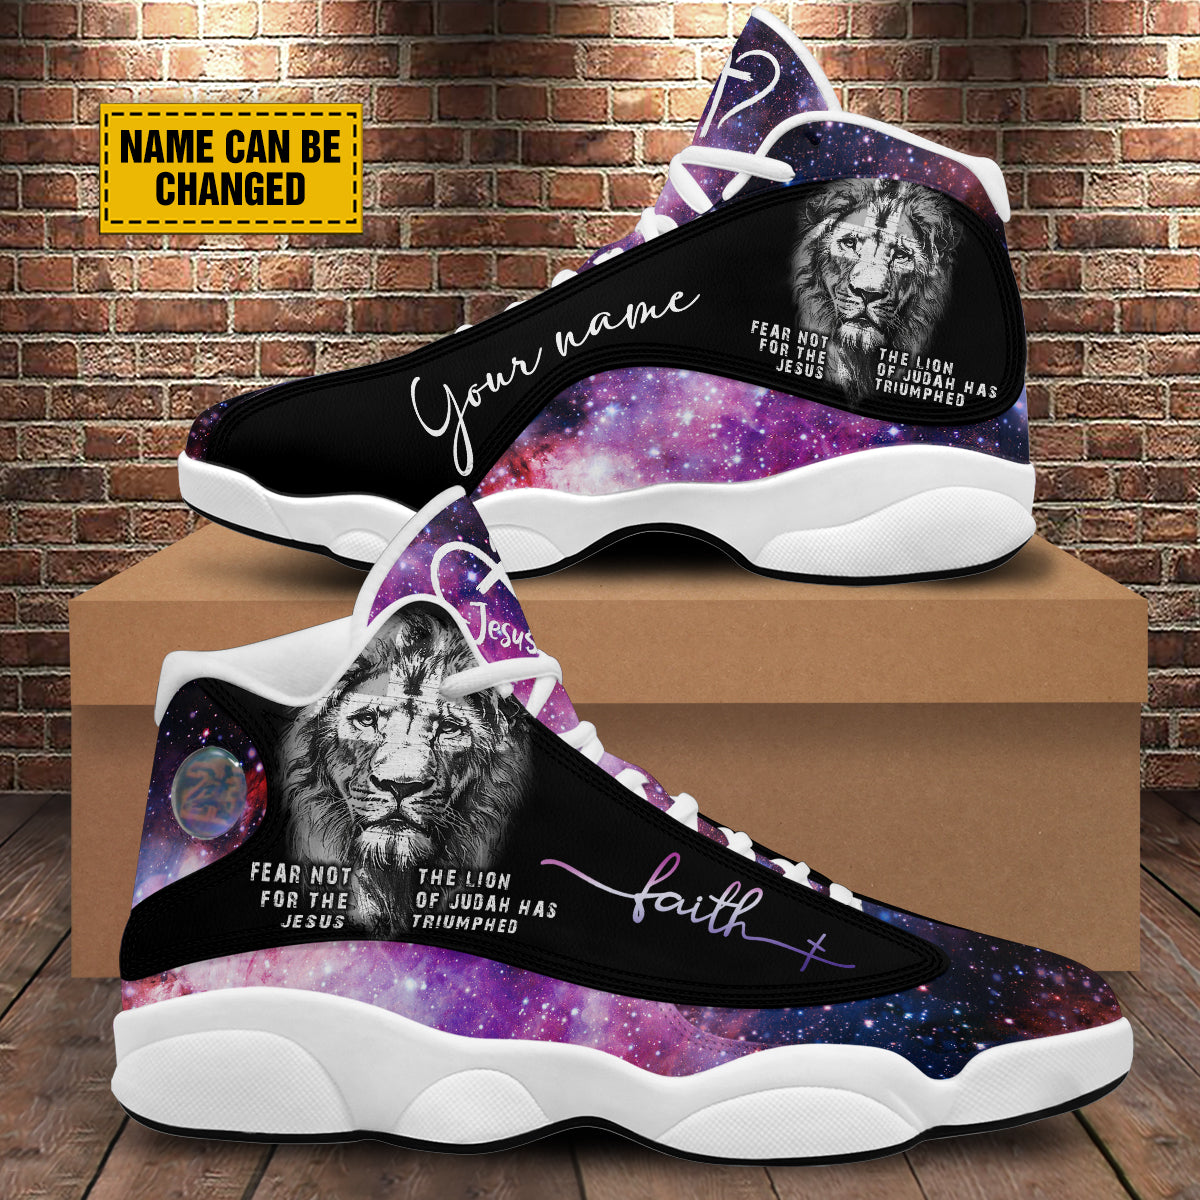 Teesdily | Lion Of Judah Basketball Shoes, The Lion Of Judah Has Triumphed Shoes, Christian Gifts Unisex Basketball Shoes With Thick Soles